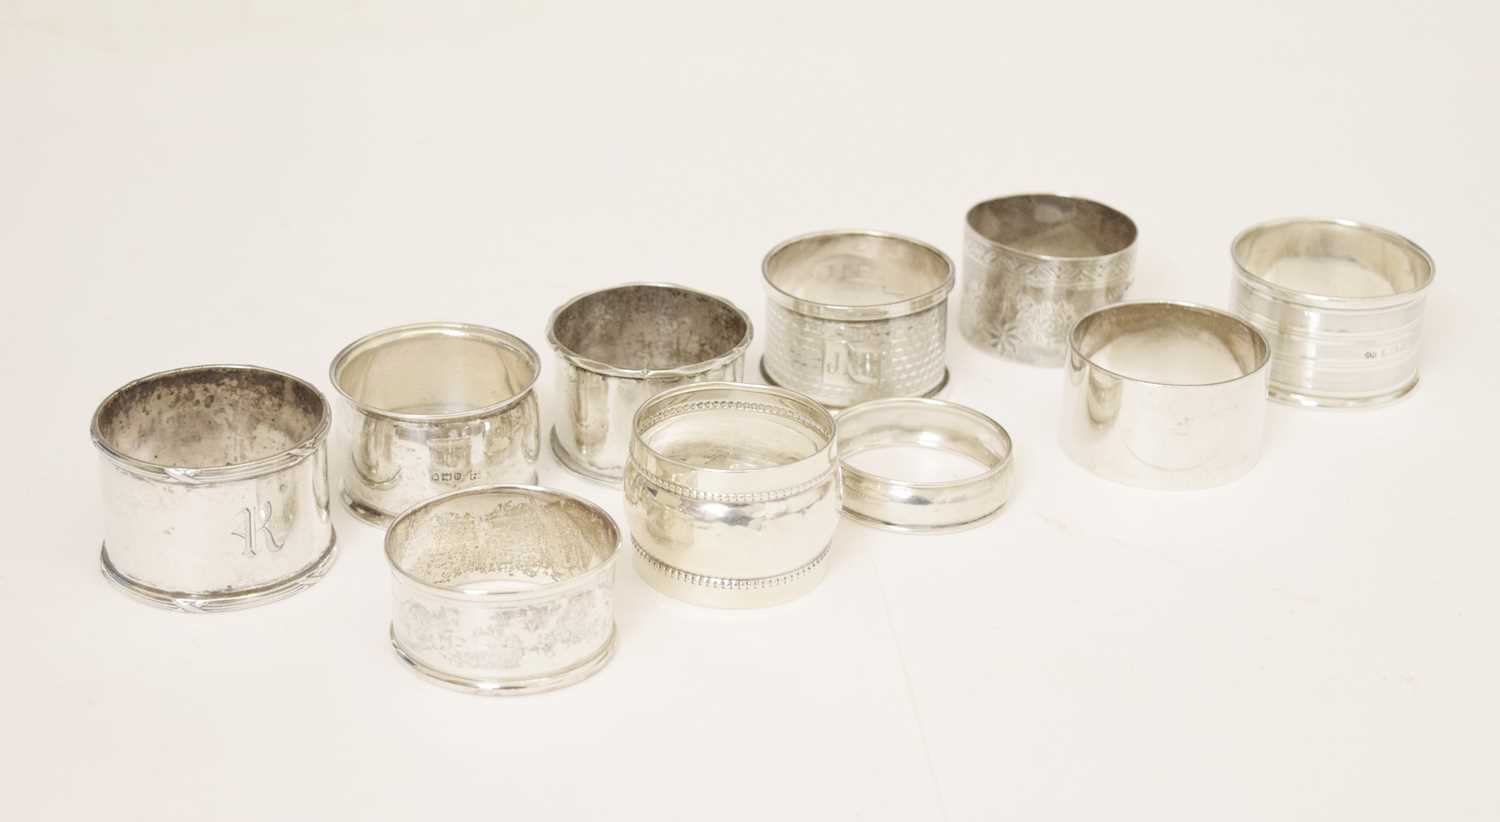 Ten late 19th/early 20th century silver napkin rings